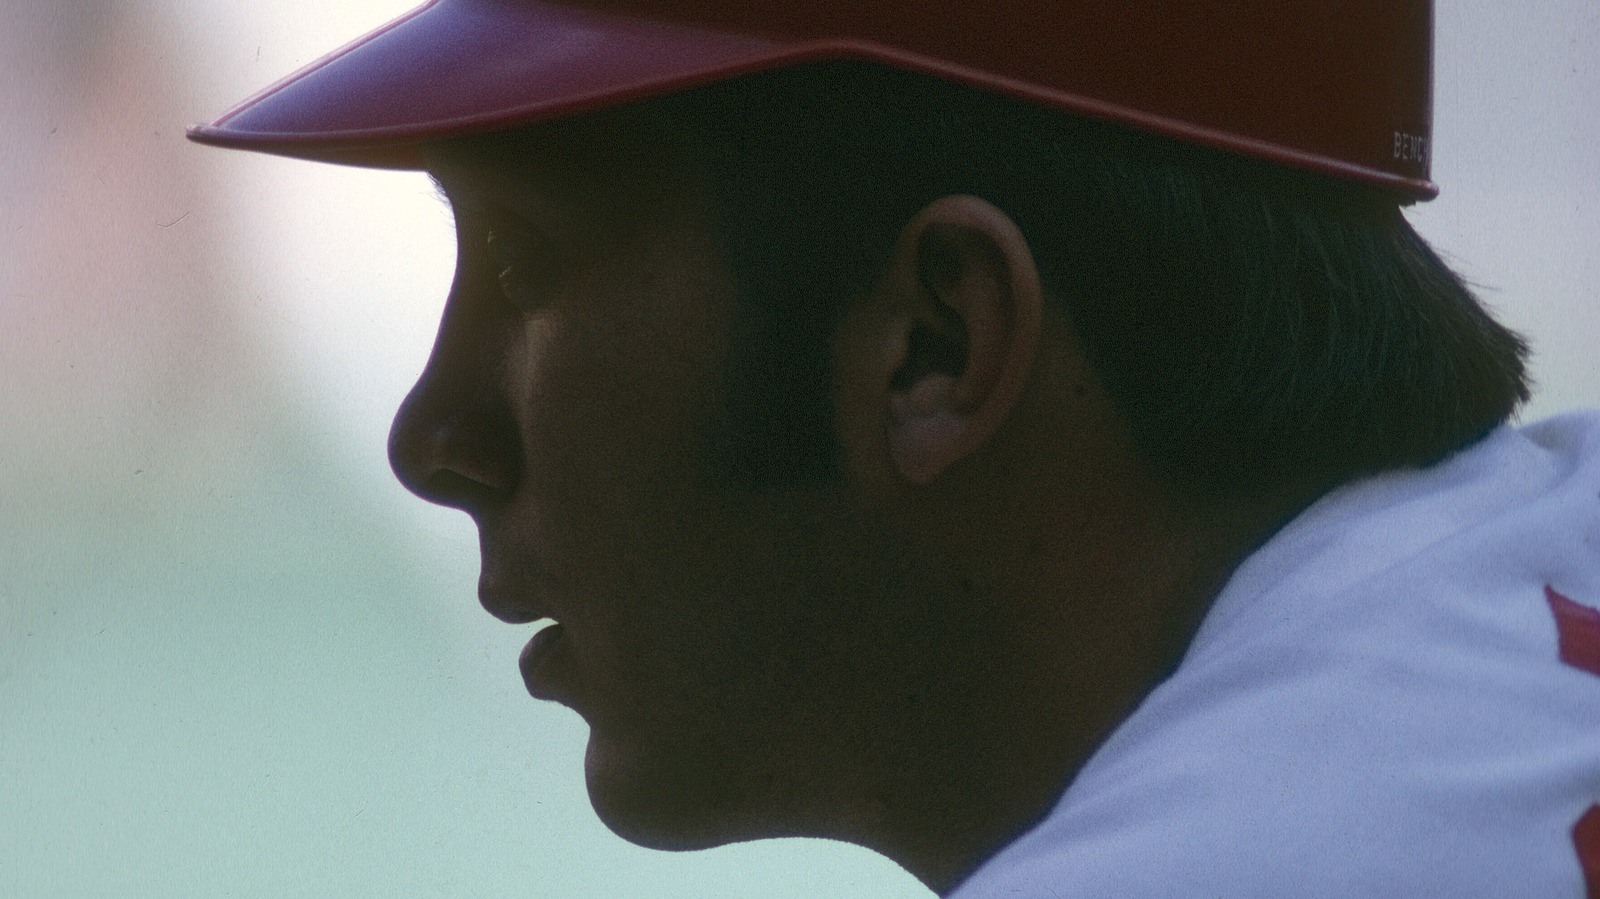 Johnny Bench Facts